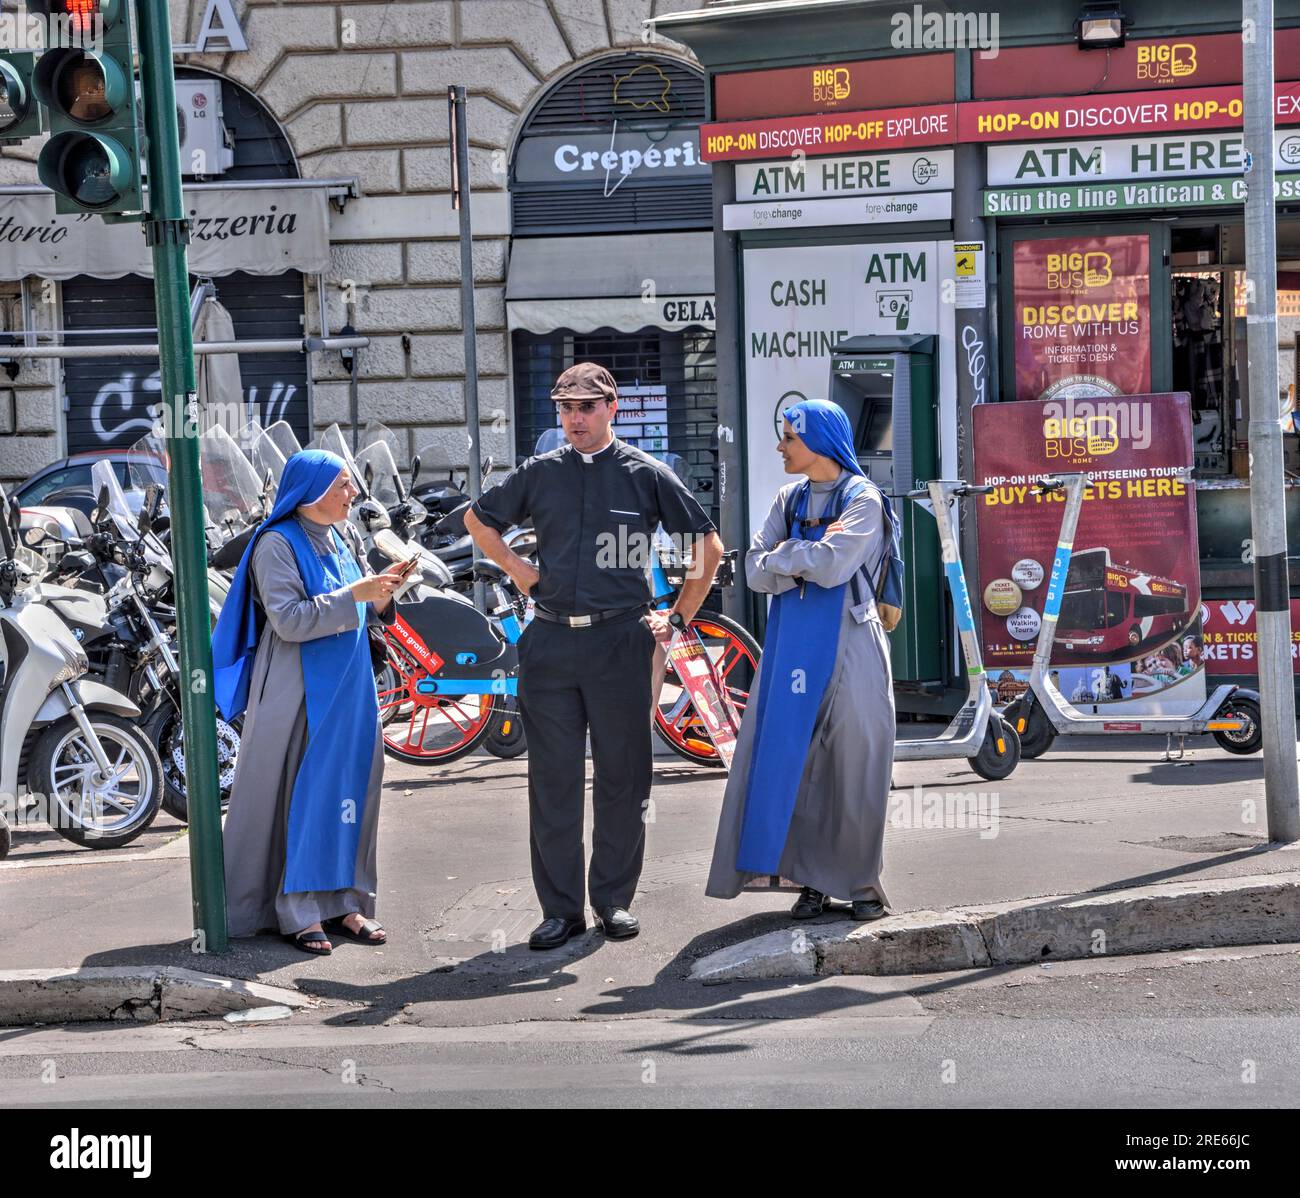 Rome, Italy - September 2, 2022: A Catholic priest and two nuns wait to cross the street in Rome, Italy. Editorial. Stock Photo